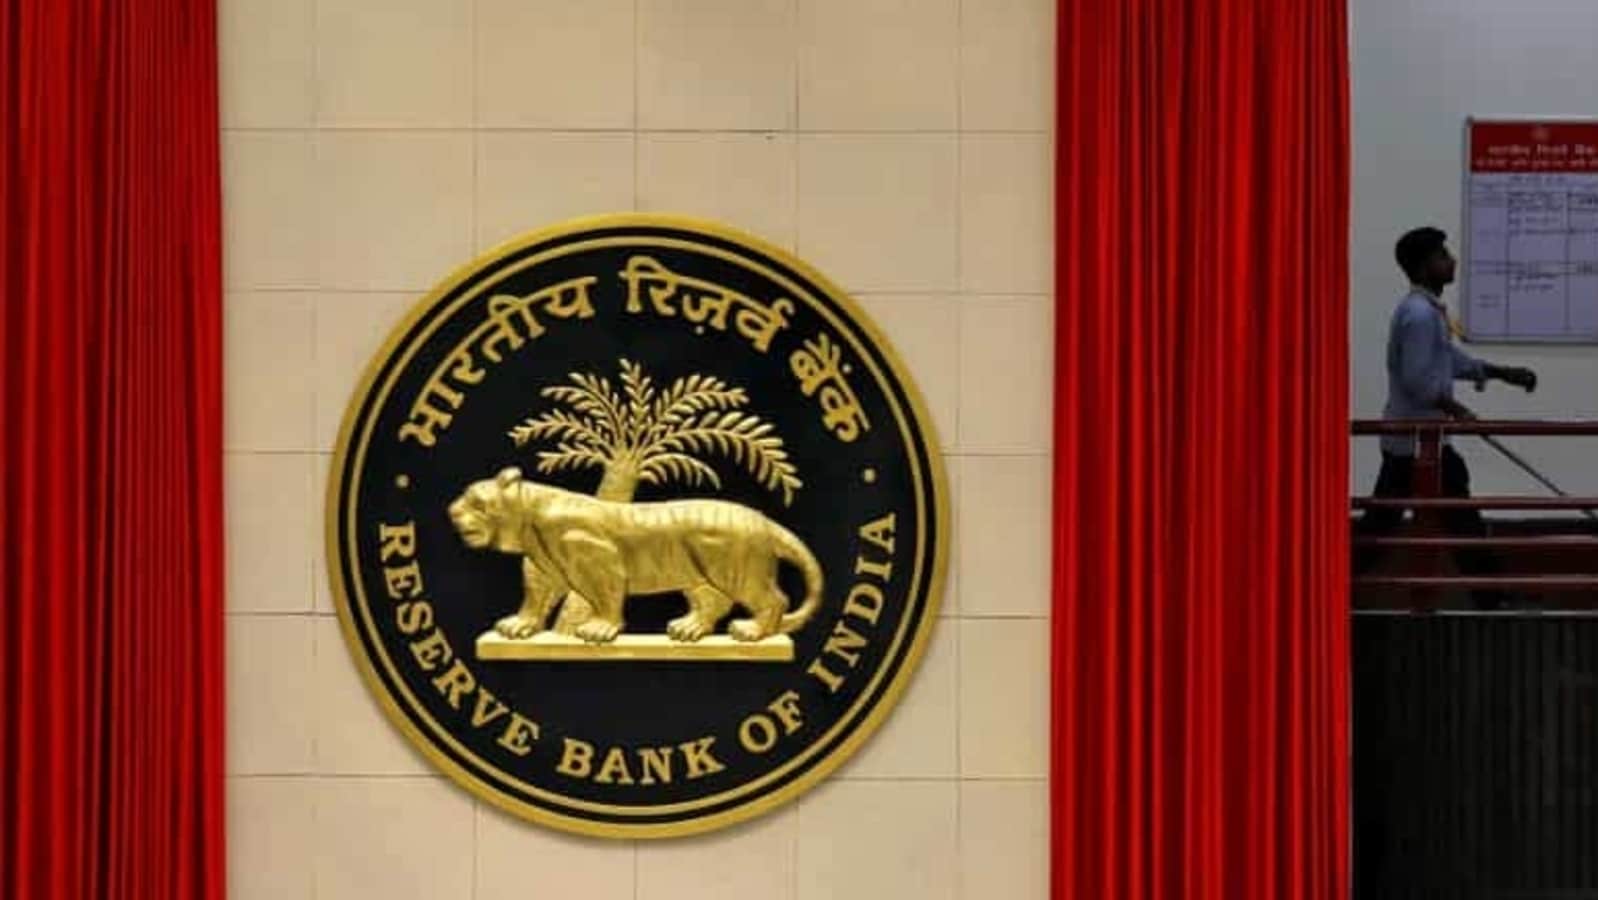 RBI report finds 600 illegal loan apps operating in India (GS: 3 Economy)